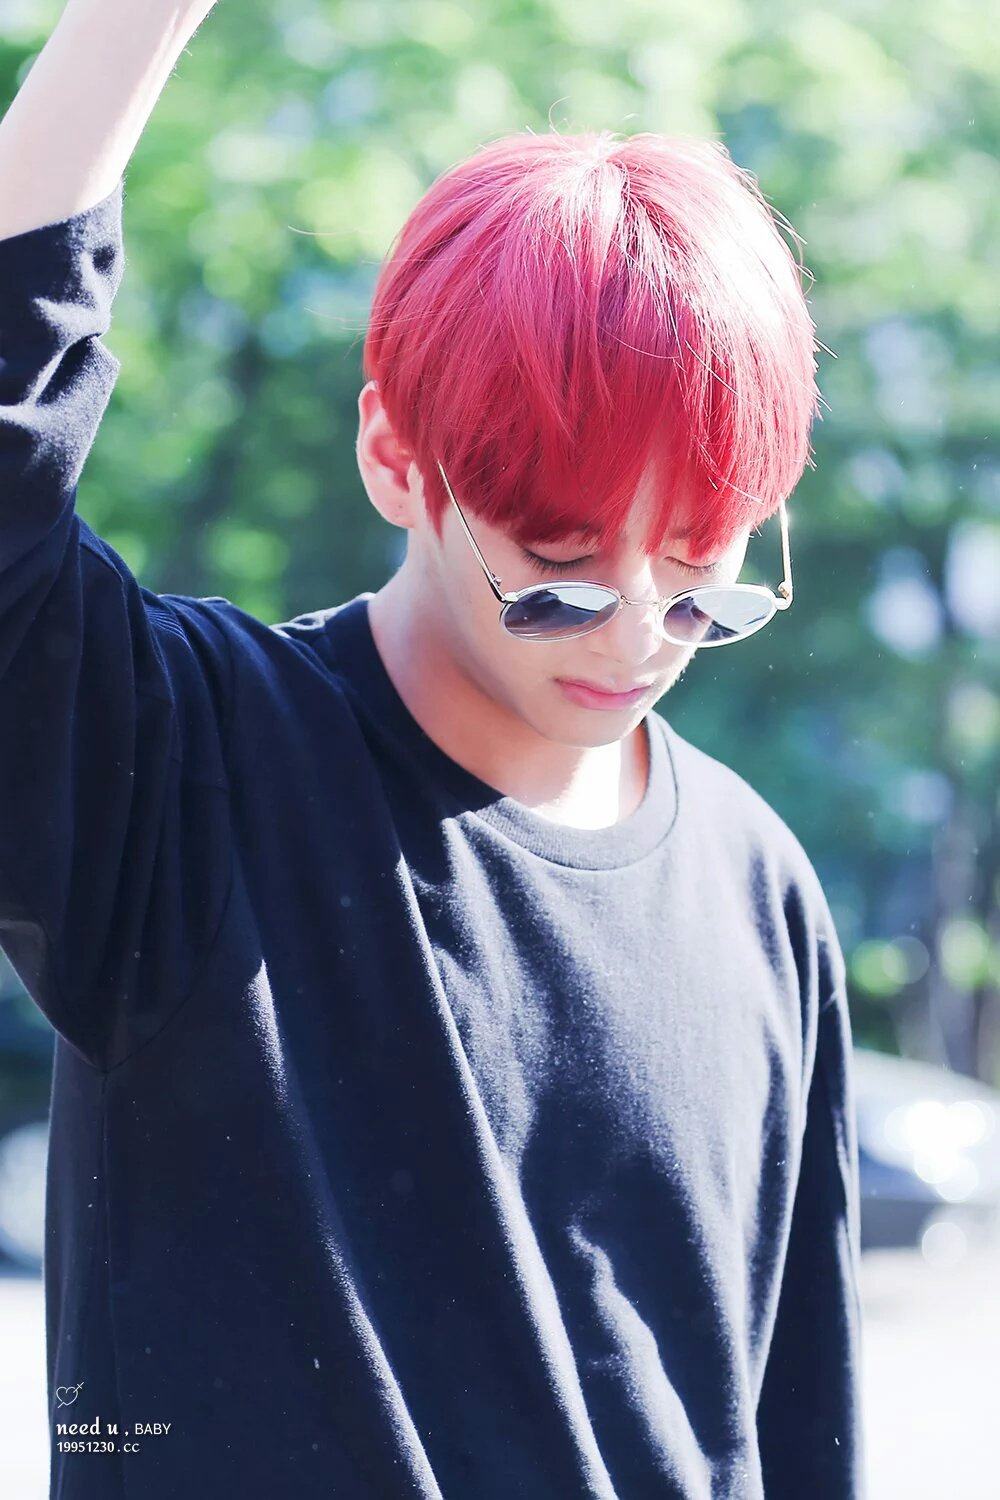 Would someone be able to give a timeline of Taehyung's hair colors? - Quora